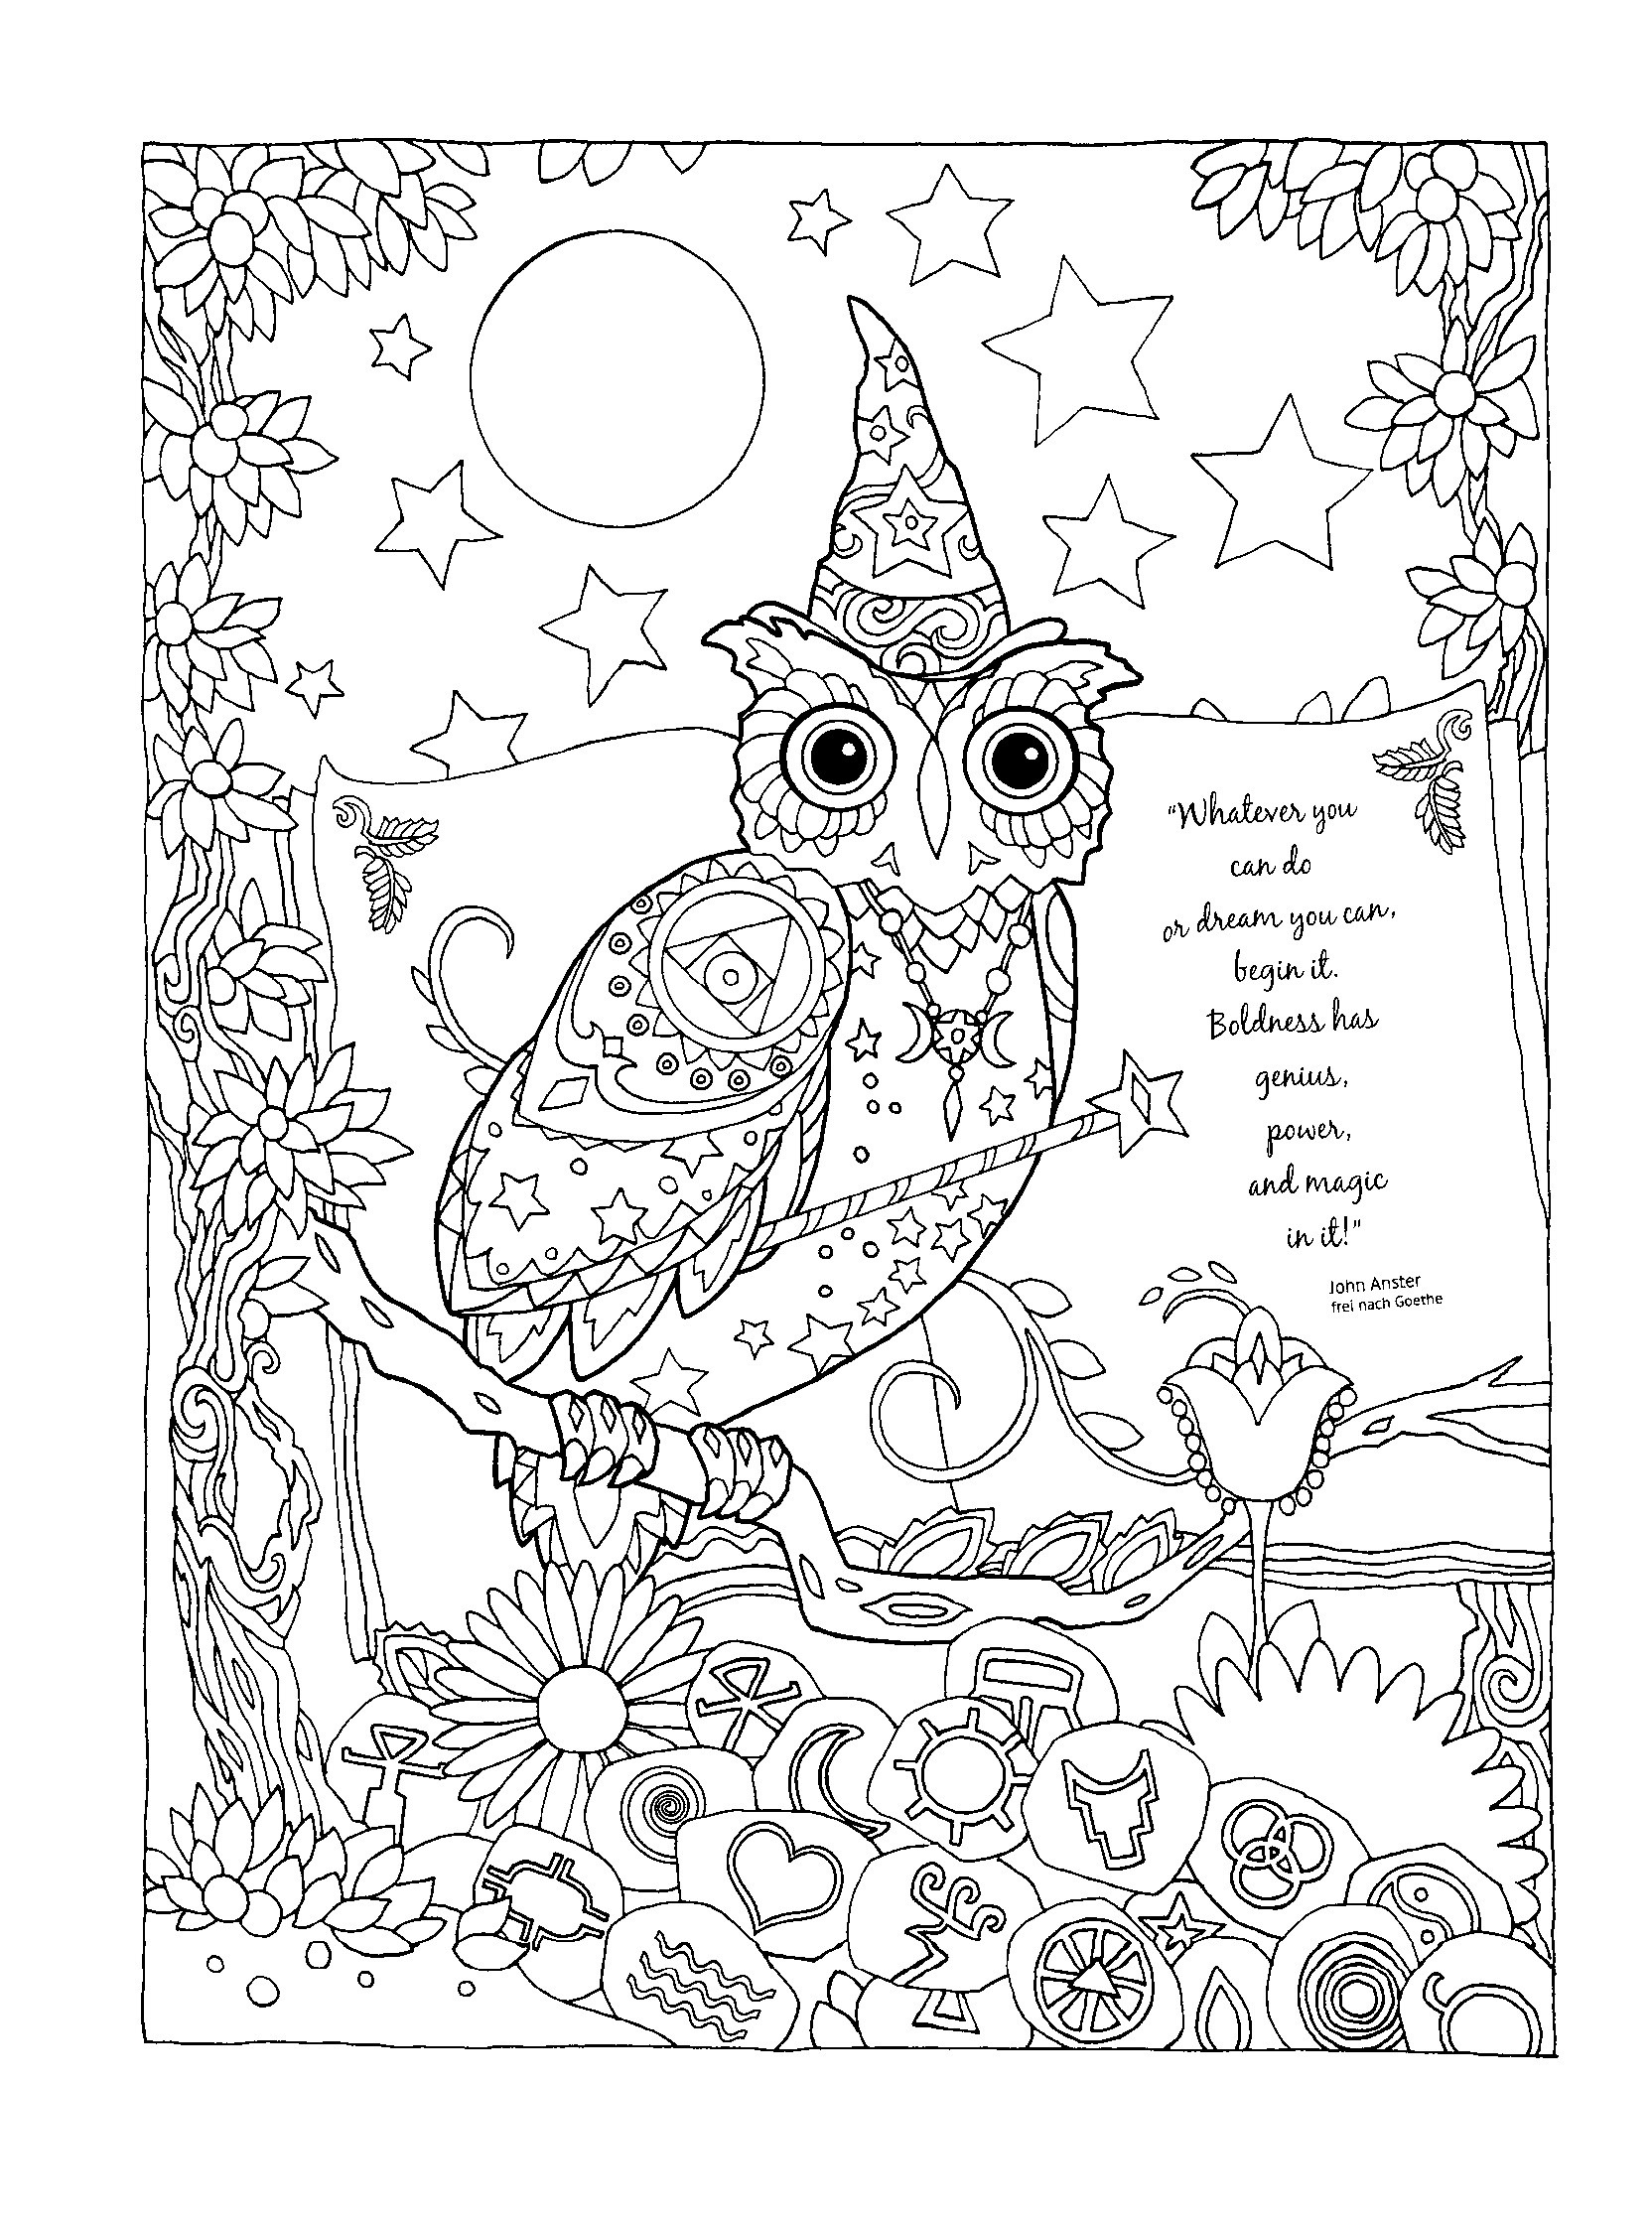 www-crayola-com-free-coloring-pages-at-getdrawings-free-download